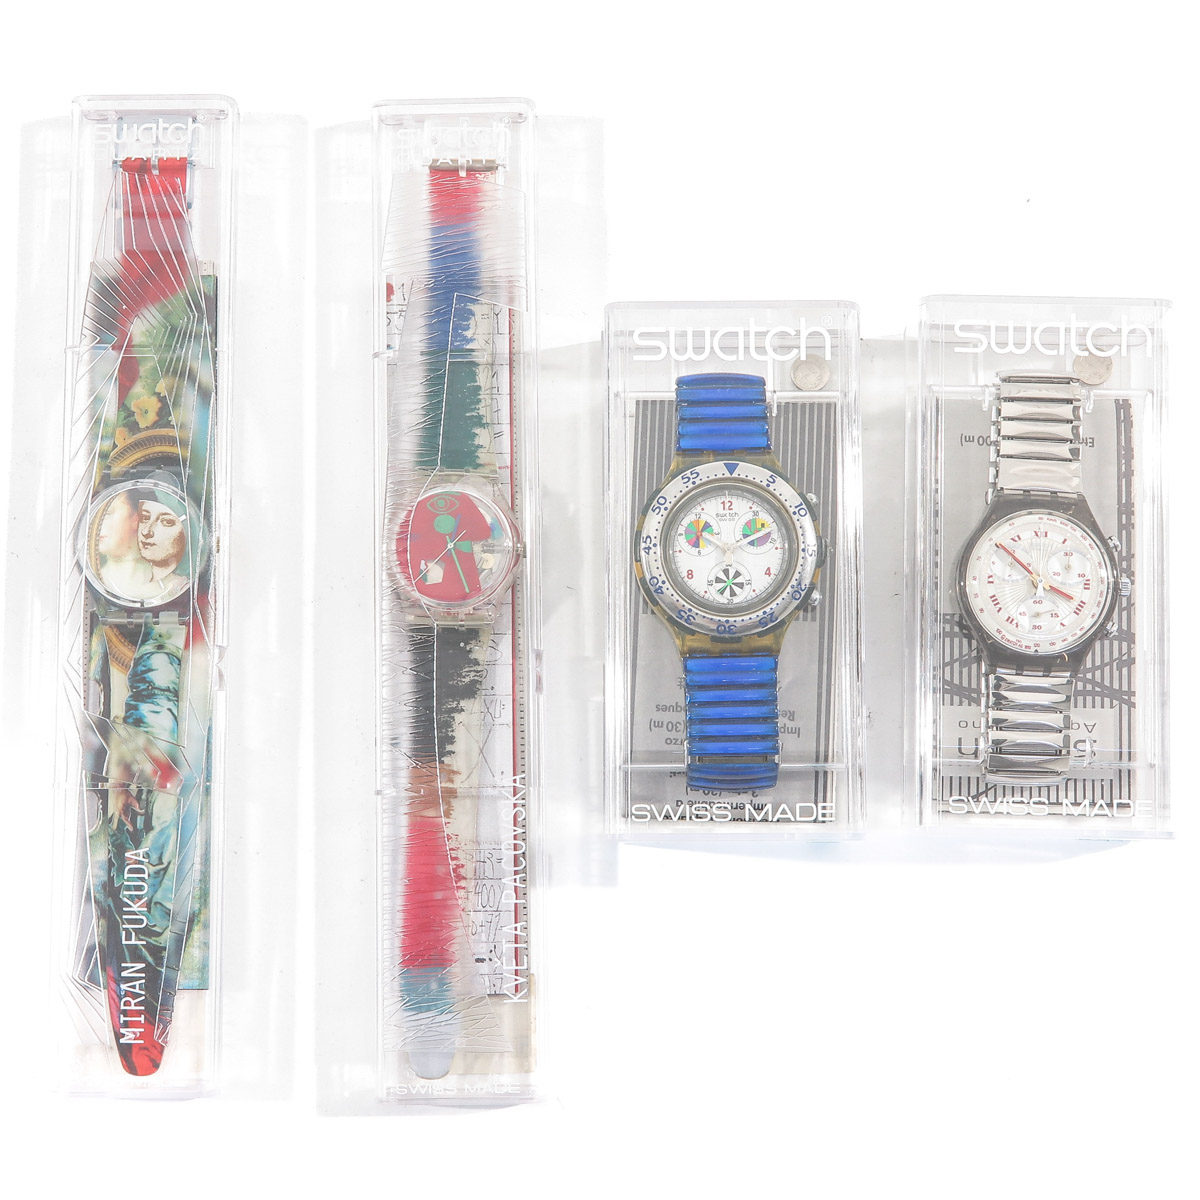 A Collection of 10 Swatch Watches - Image 7 of 8